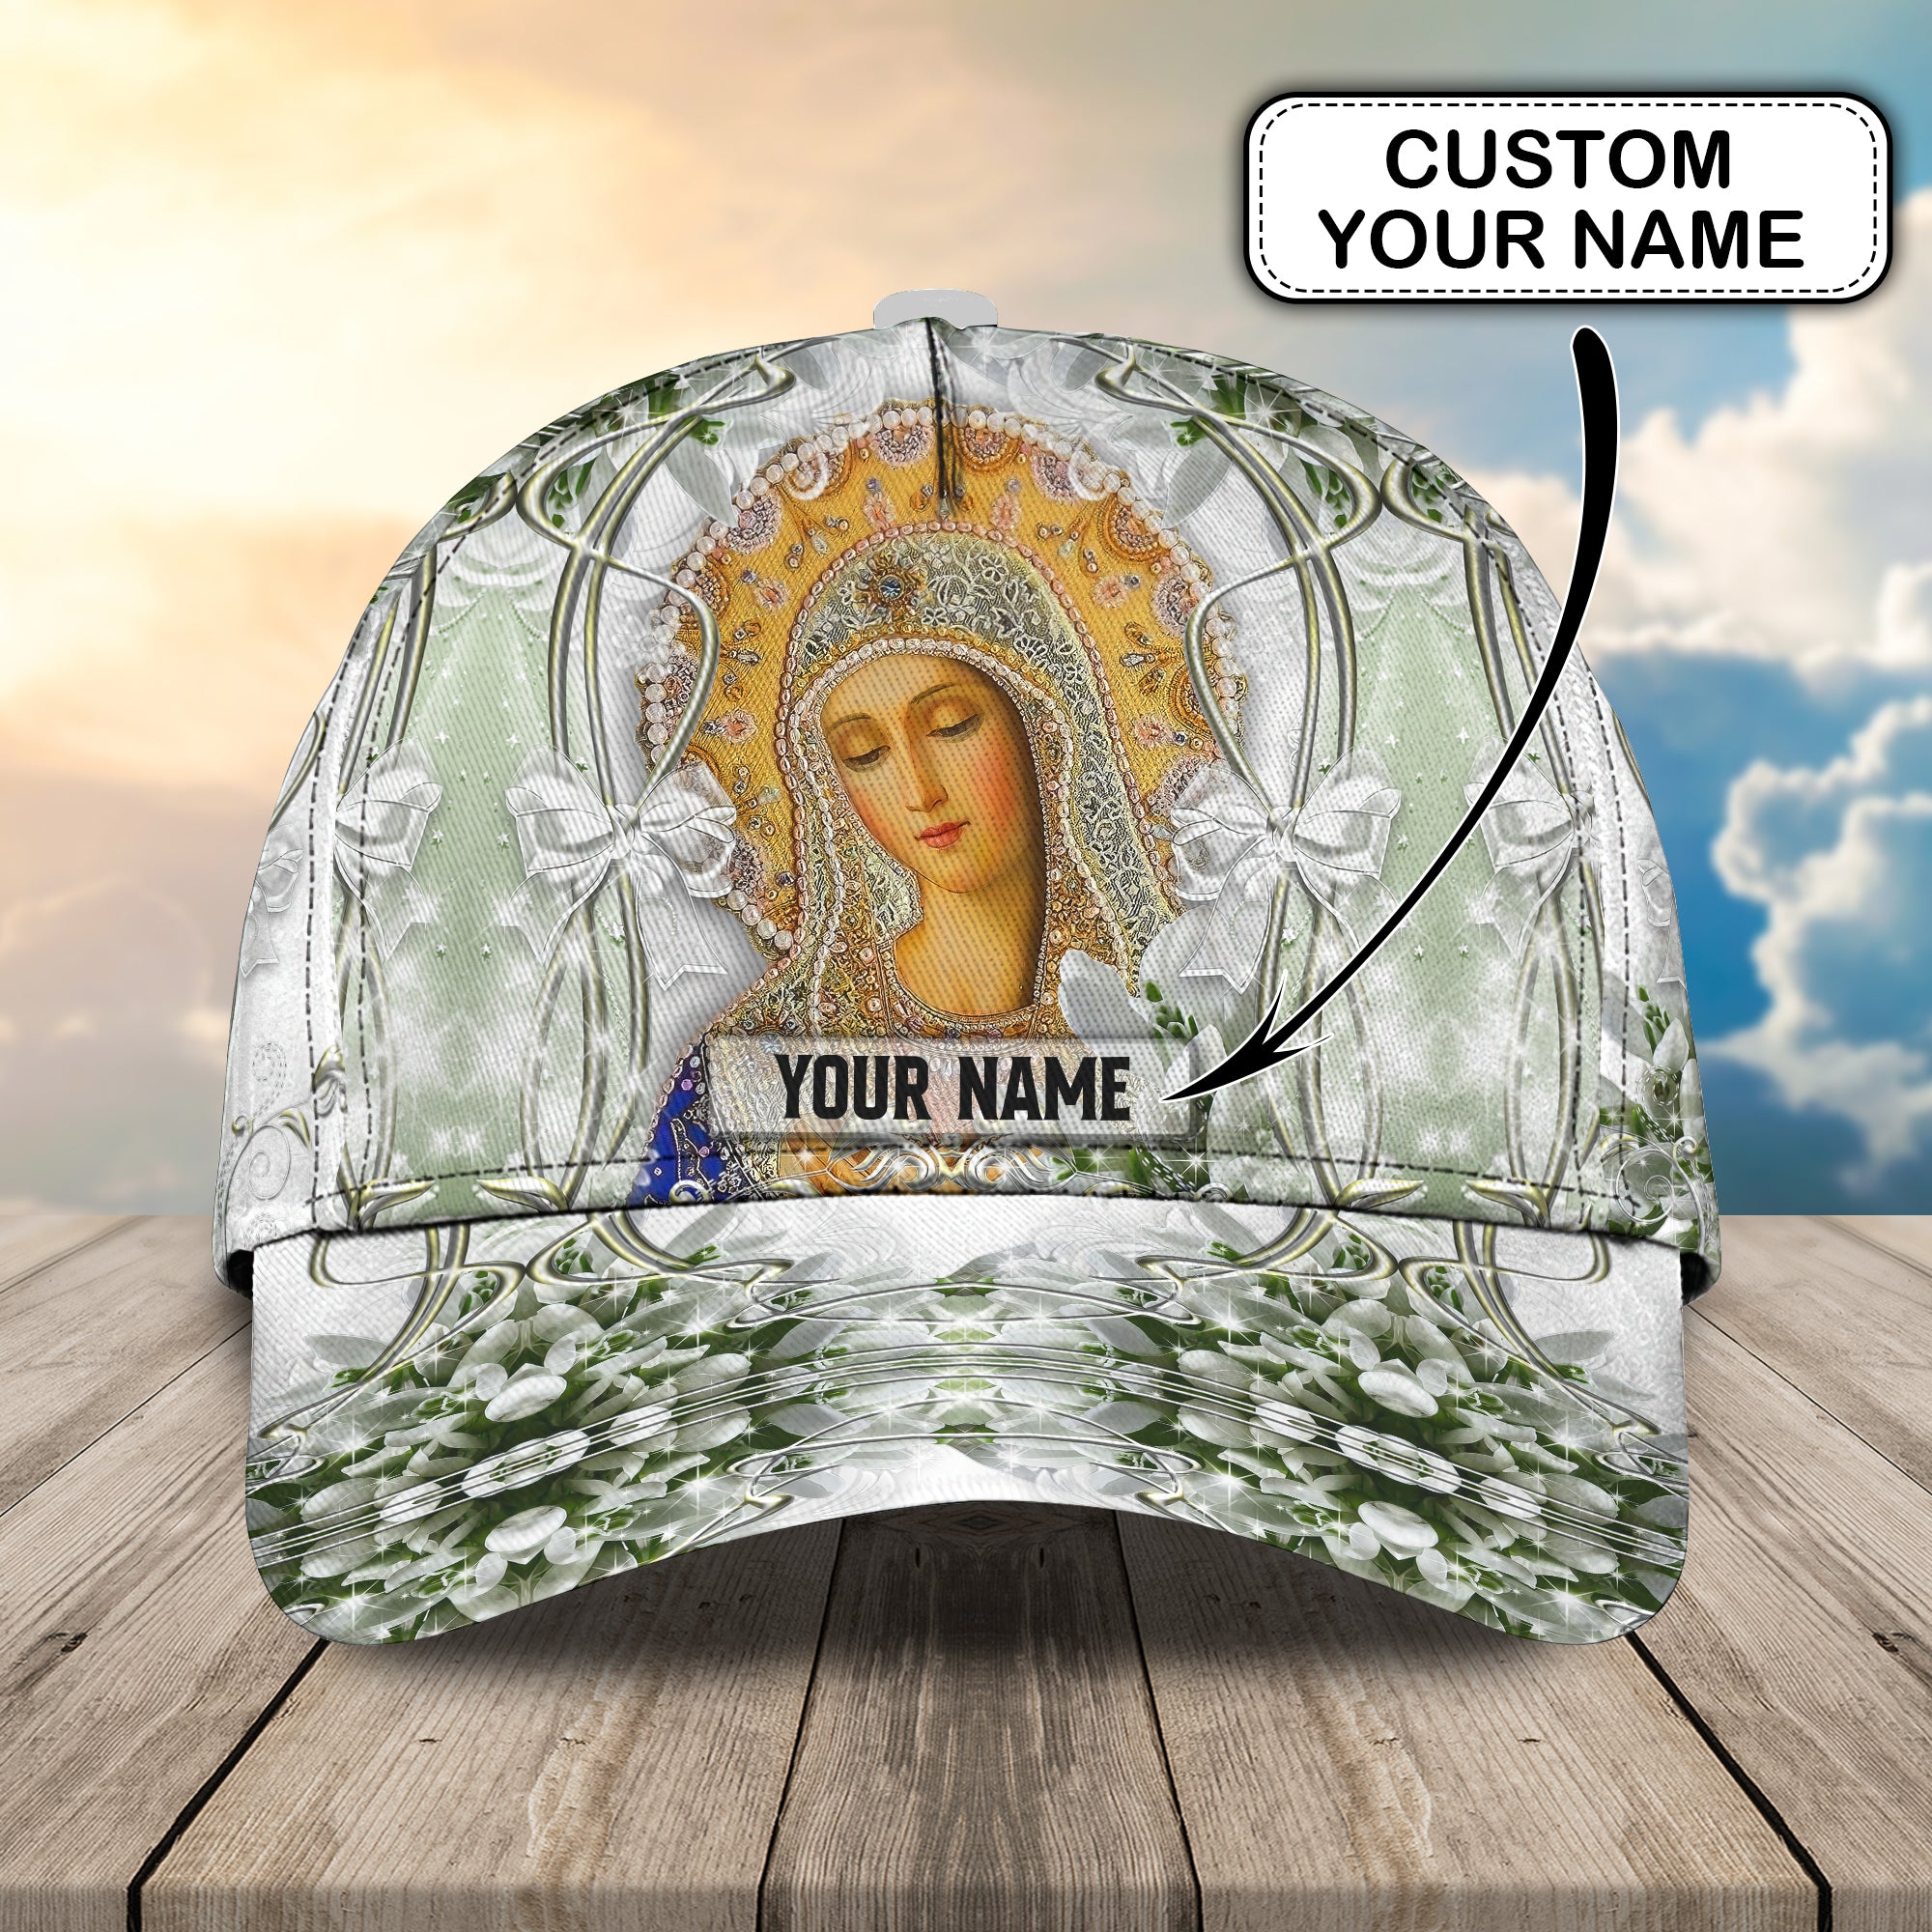 Mary Mama - Personalized Name Cap - Loop- H9h3-299